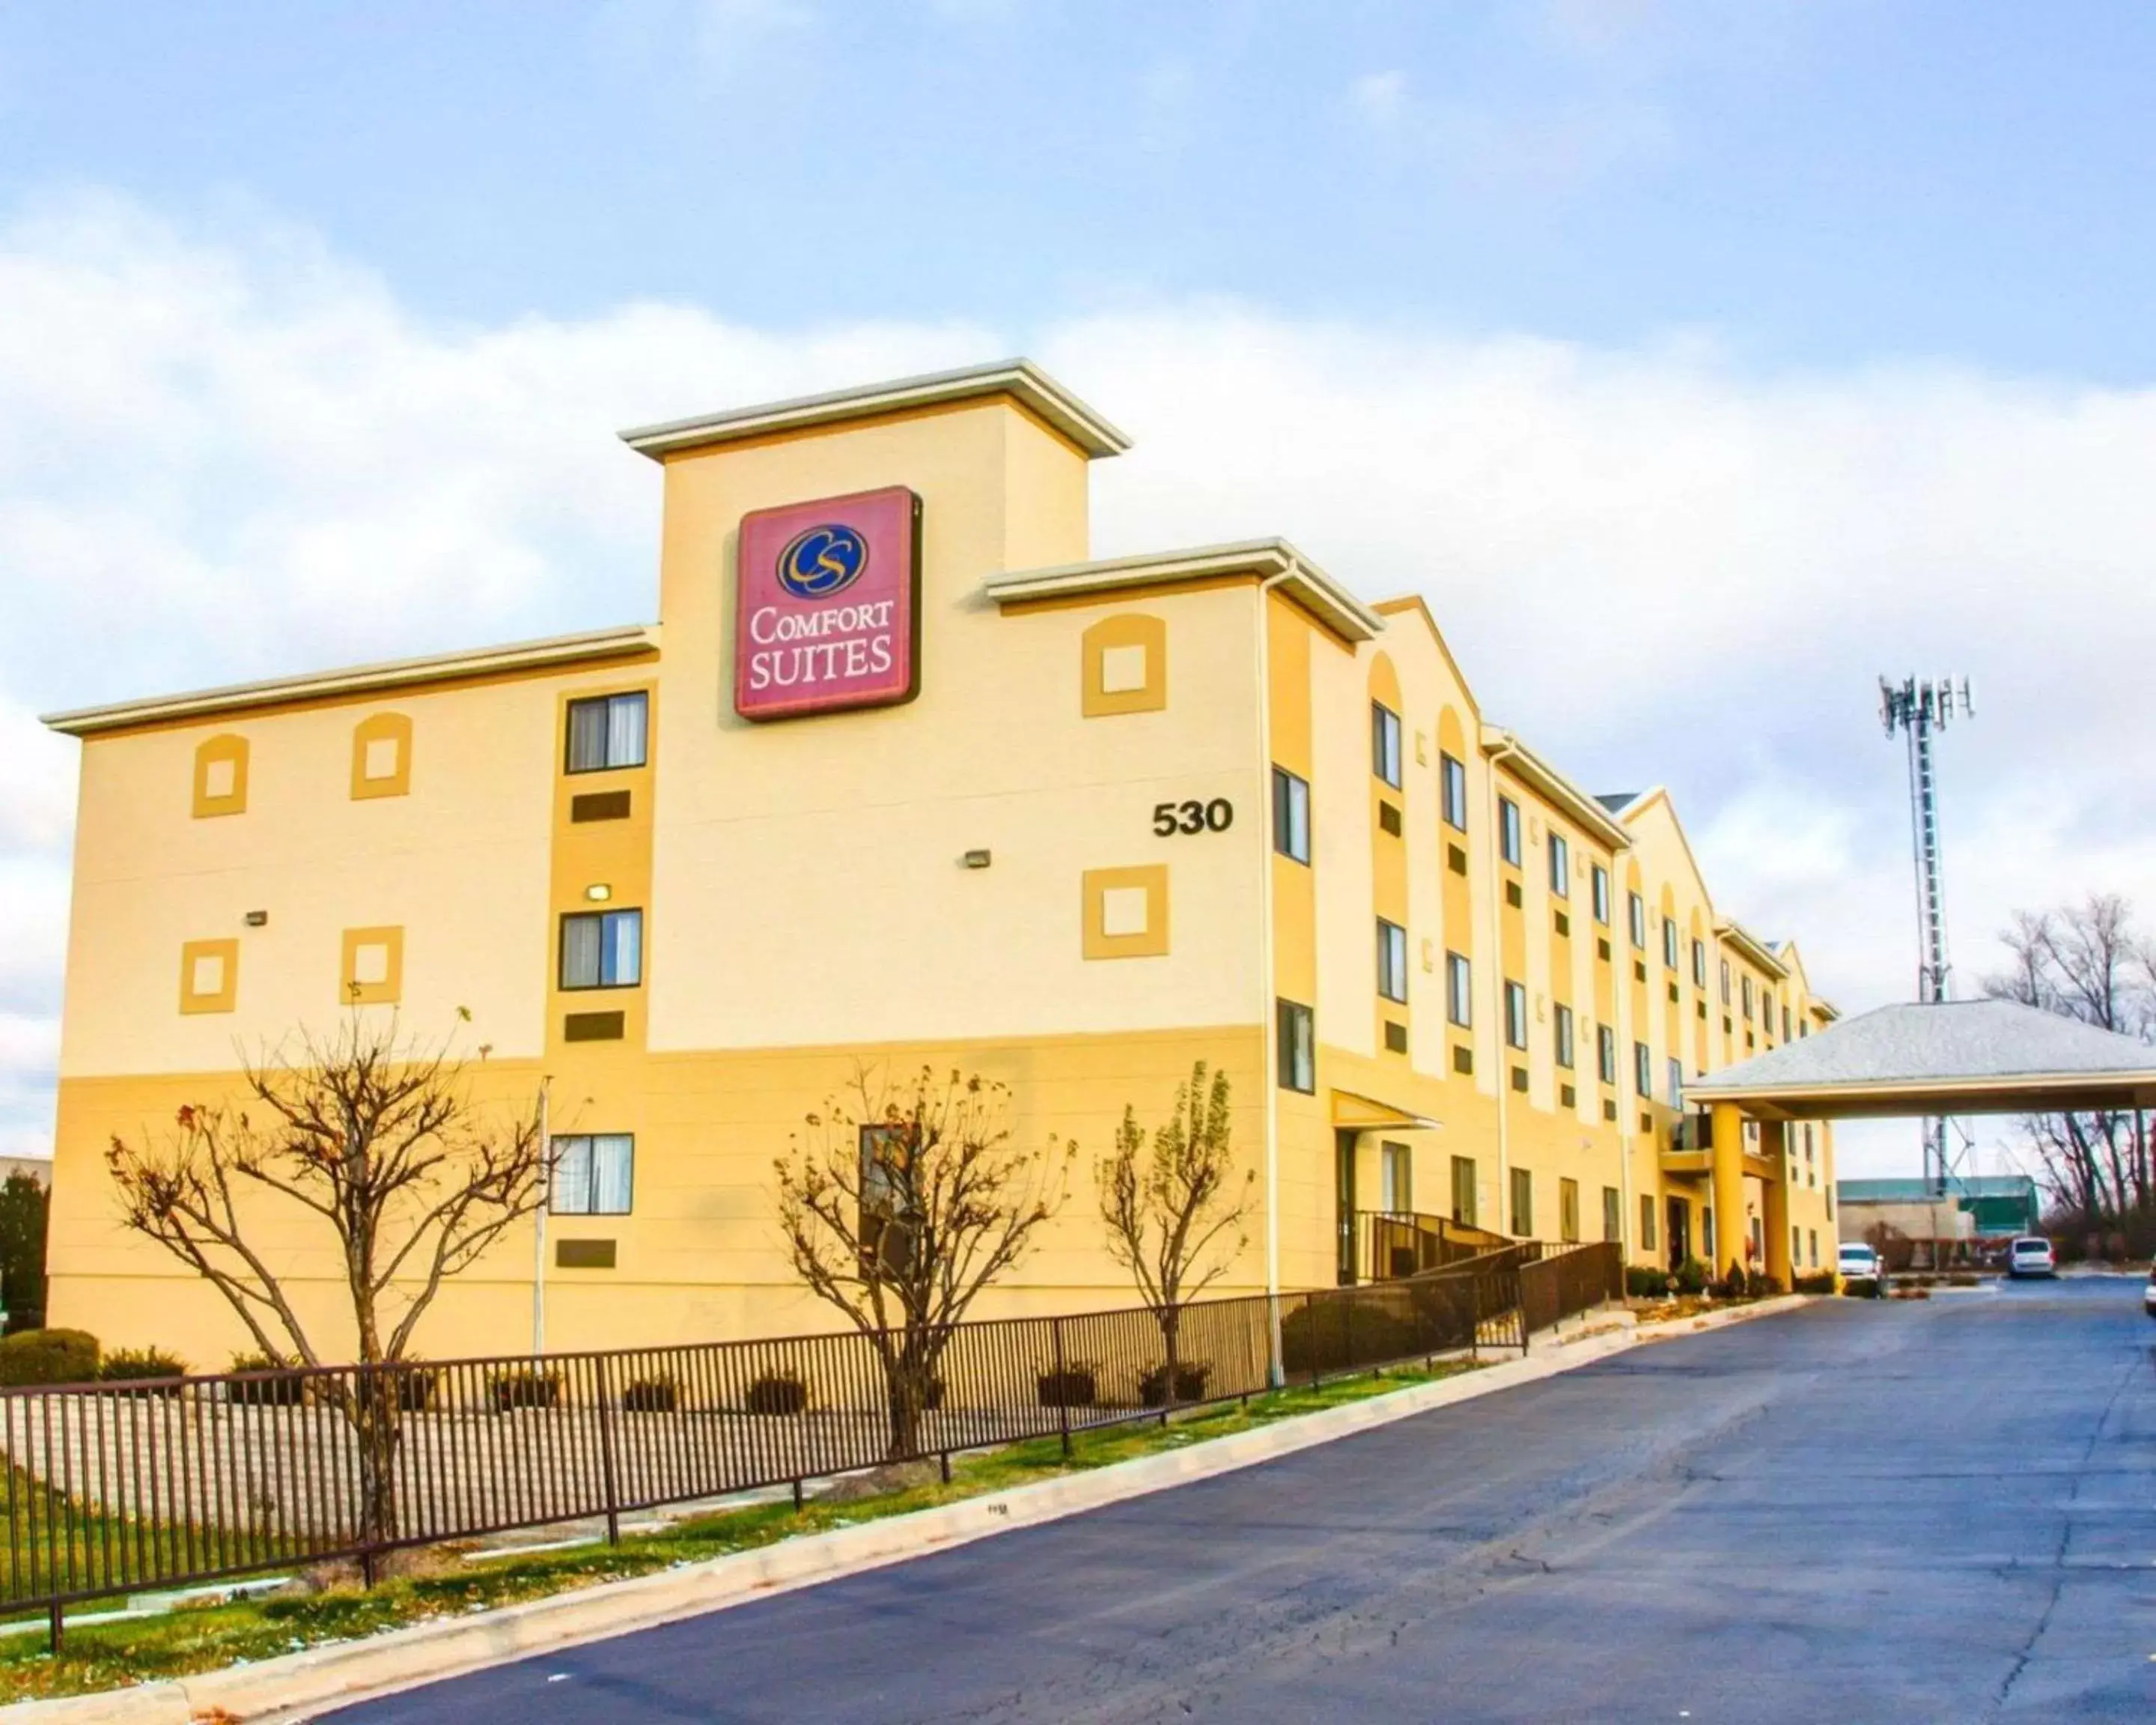 Property building in Comfort Suites Lombard/Addison